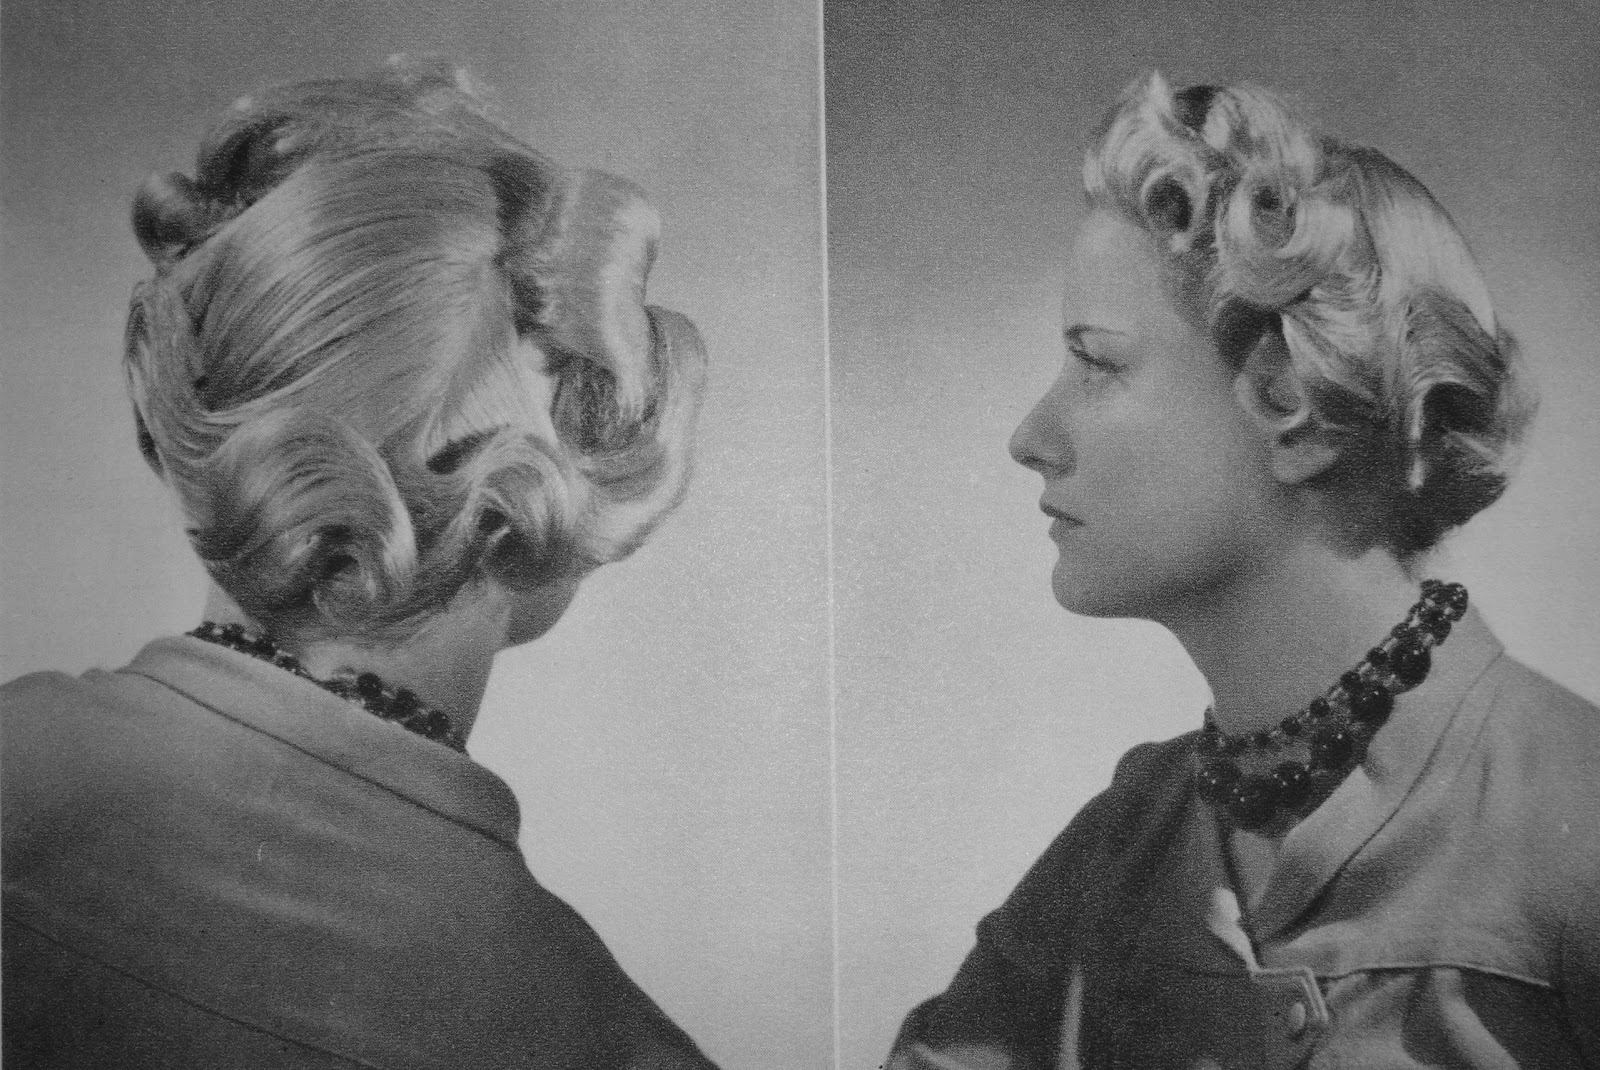 LOST IN THE 50's: 40's HAIRSTYLE